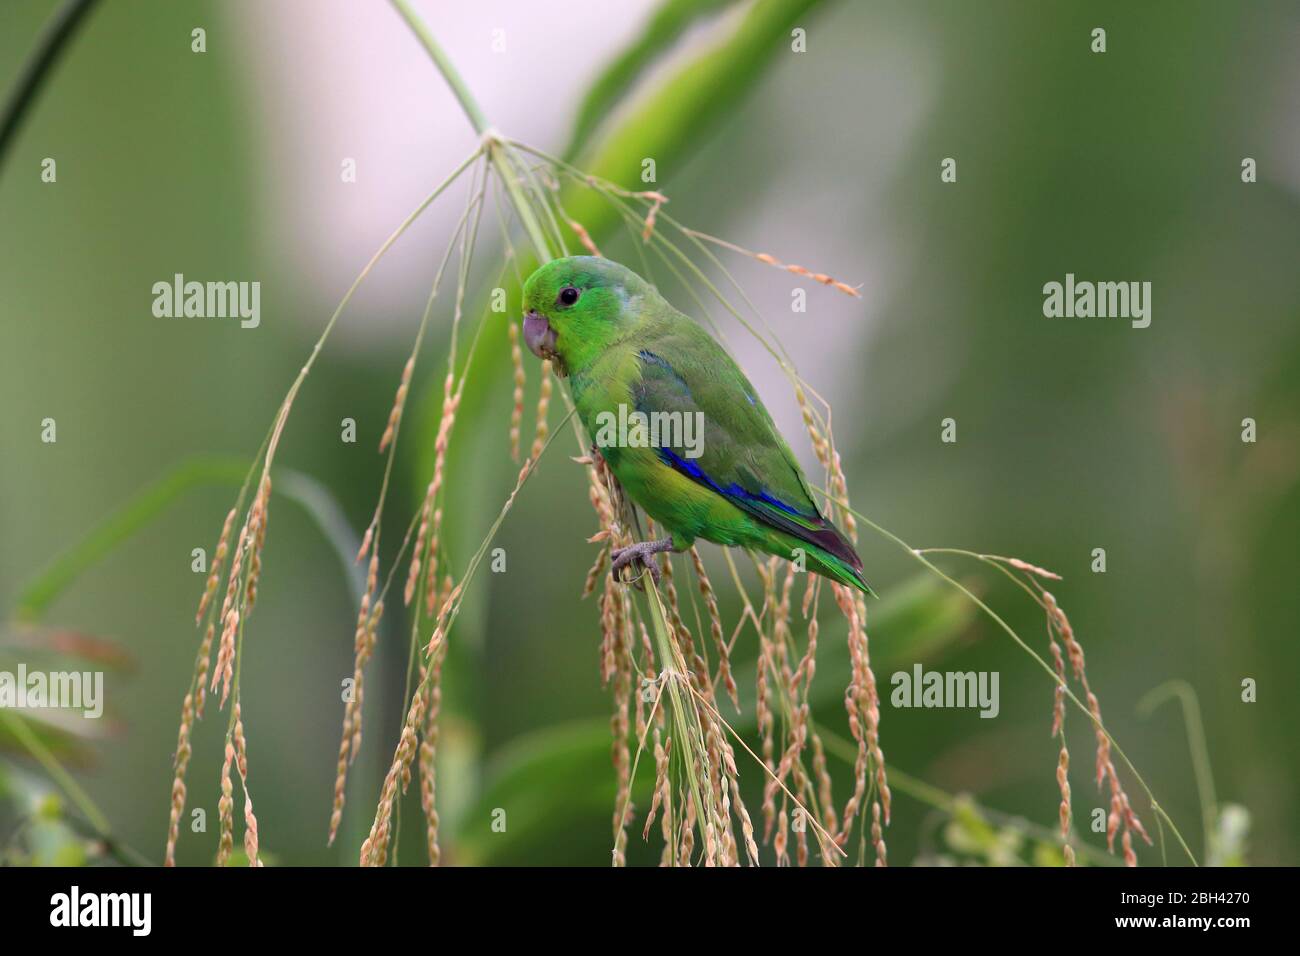 photo of the Blue-winged Parrotlet perched on a grass branch with blurred background Stock Photo